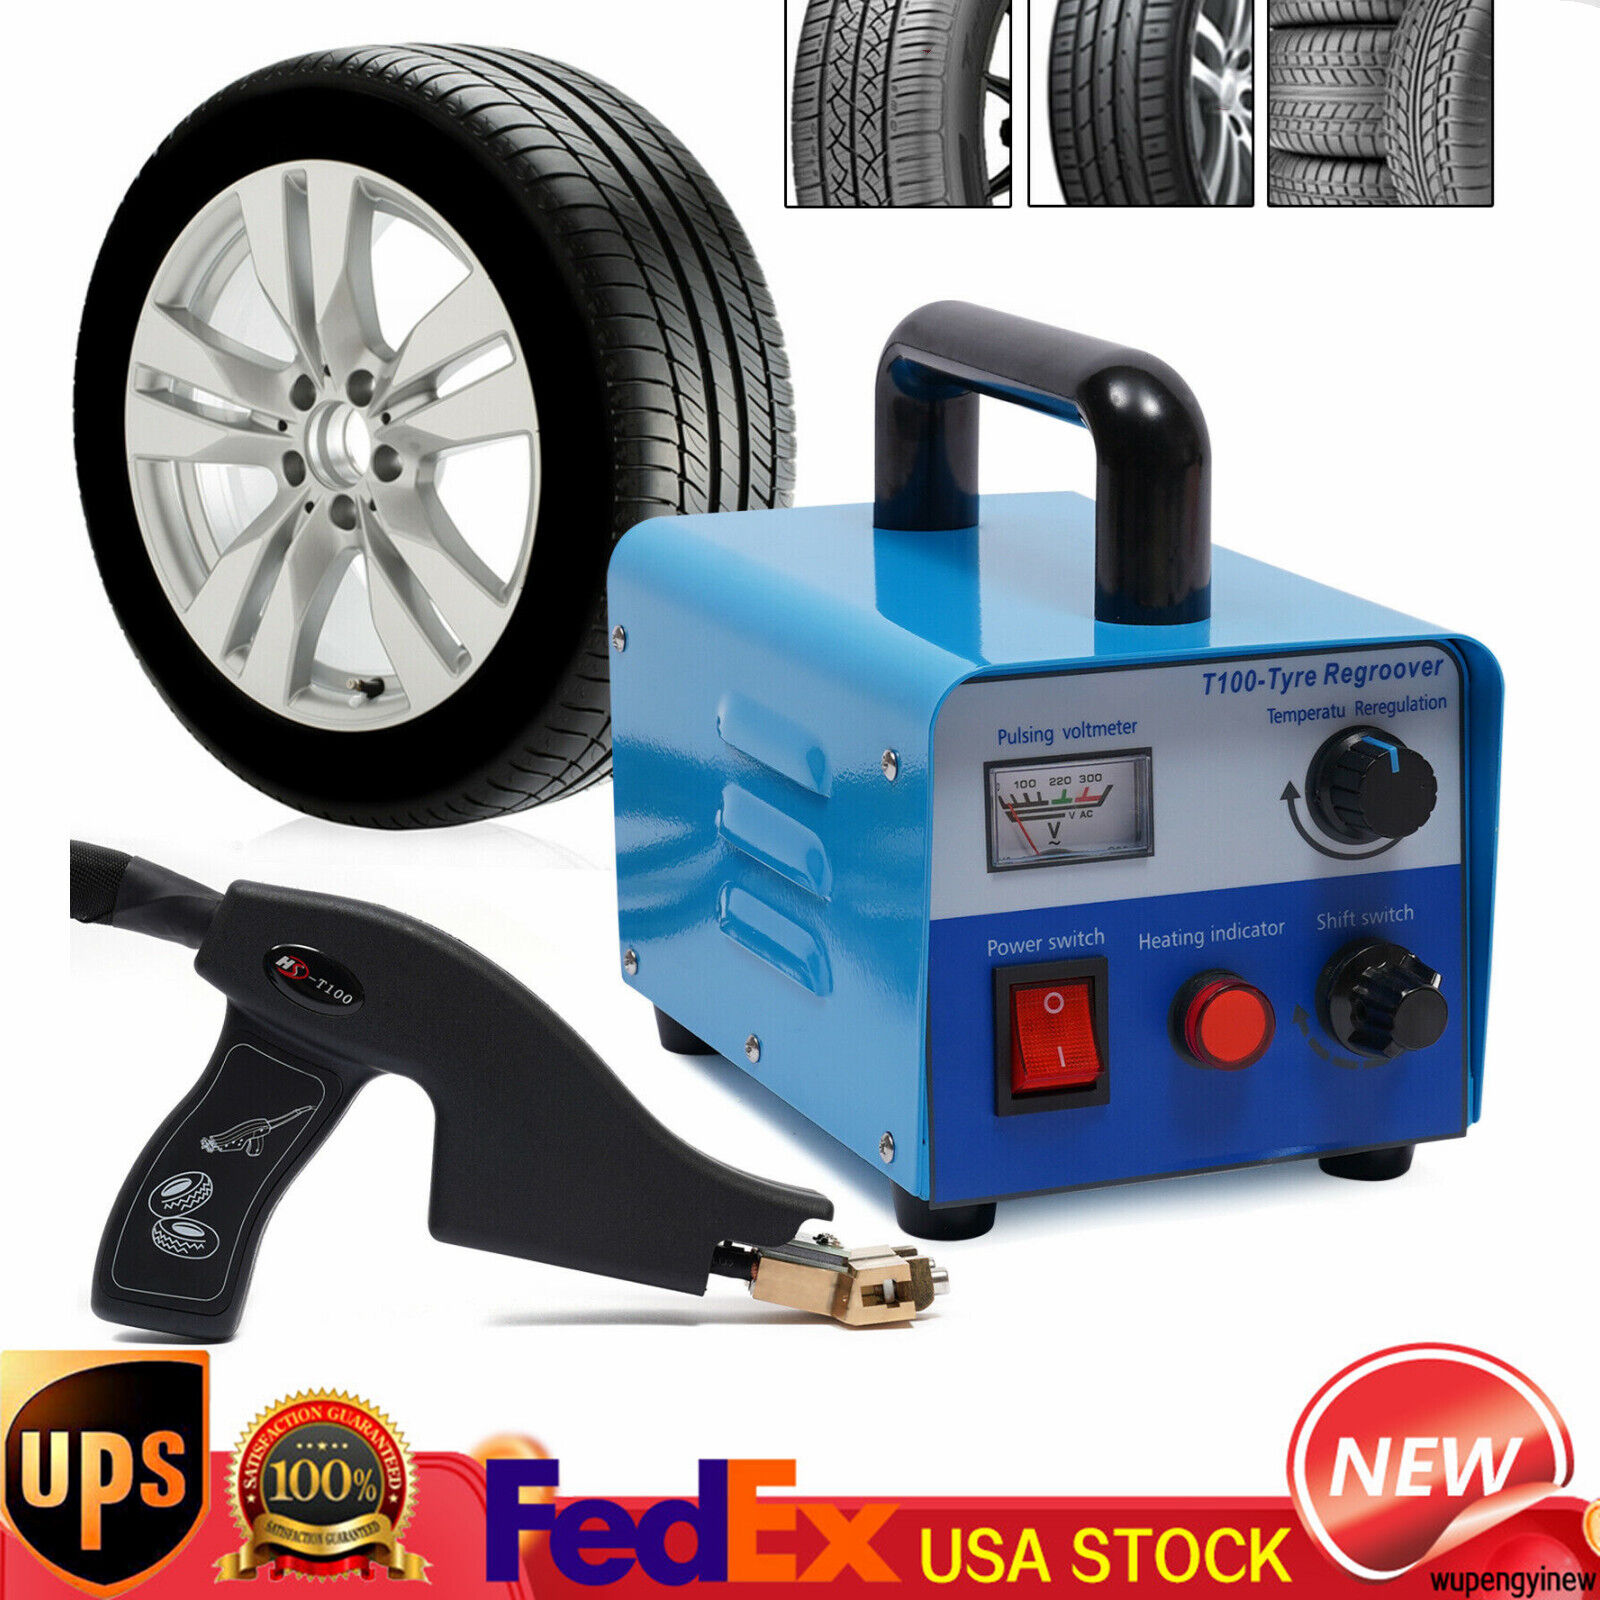 400W Truck Tire Groover Car Regroover Machine Manual Rubber Tyres Regroover